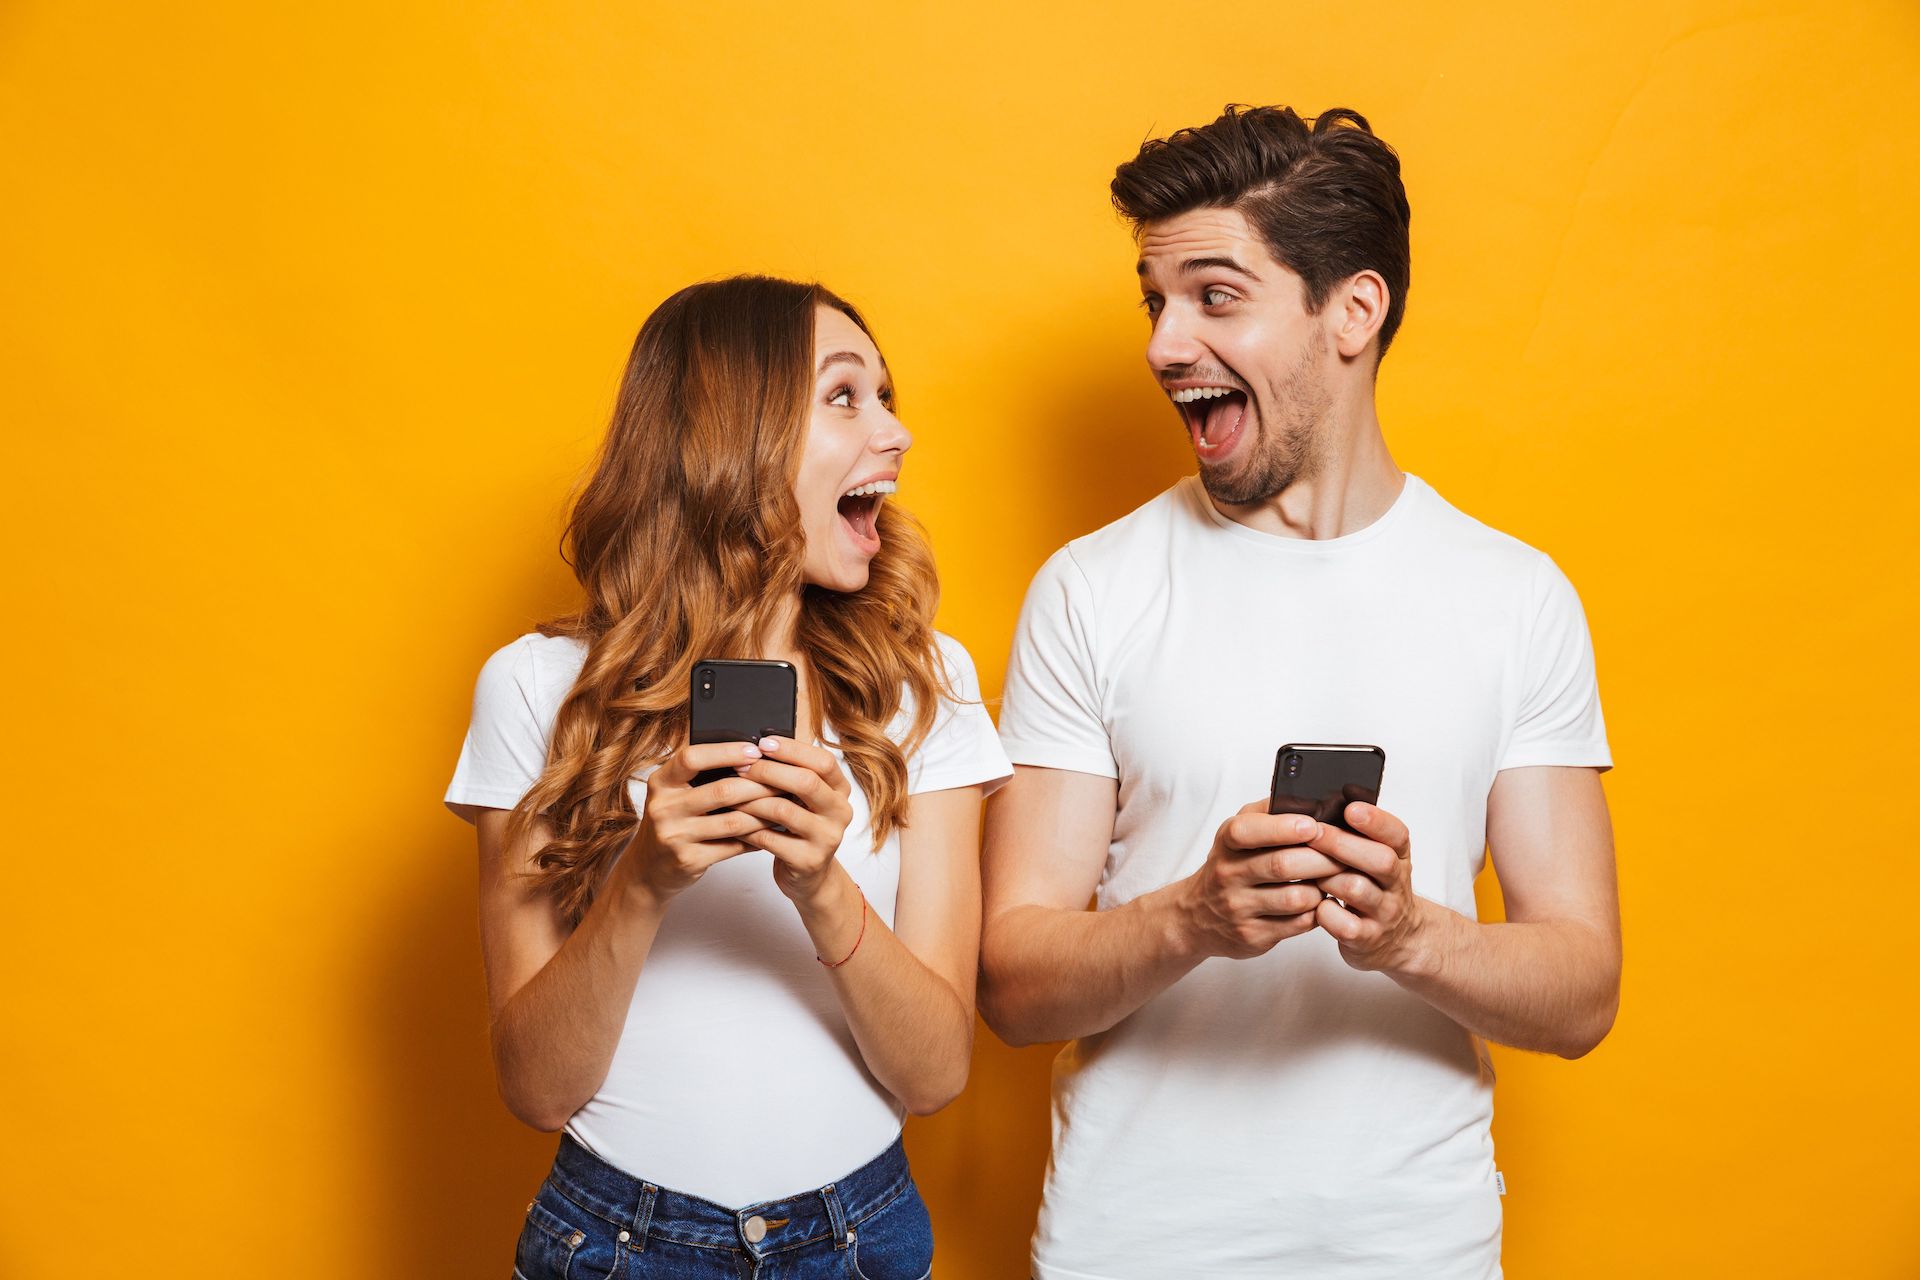 woman and man holding phones and enjoying